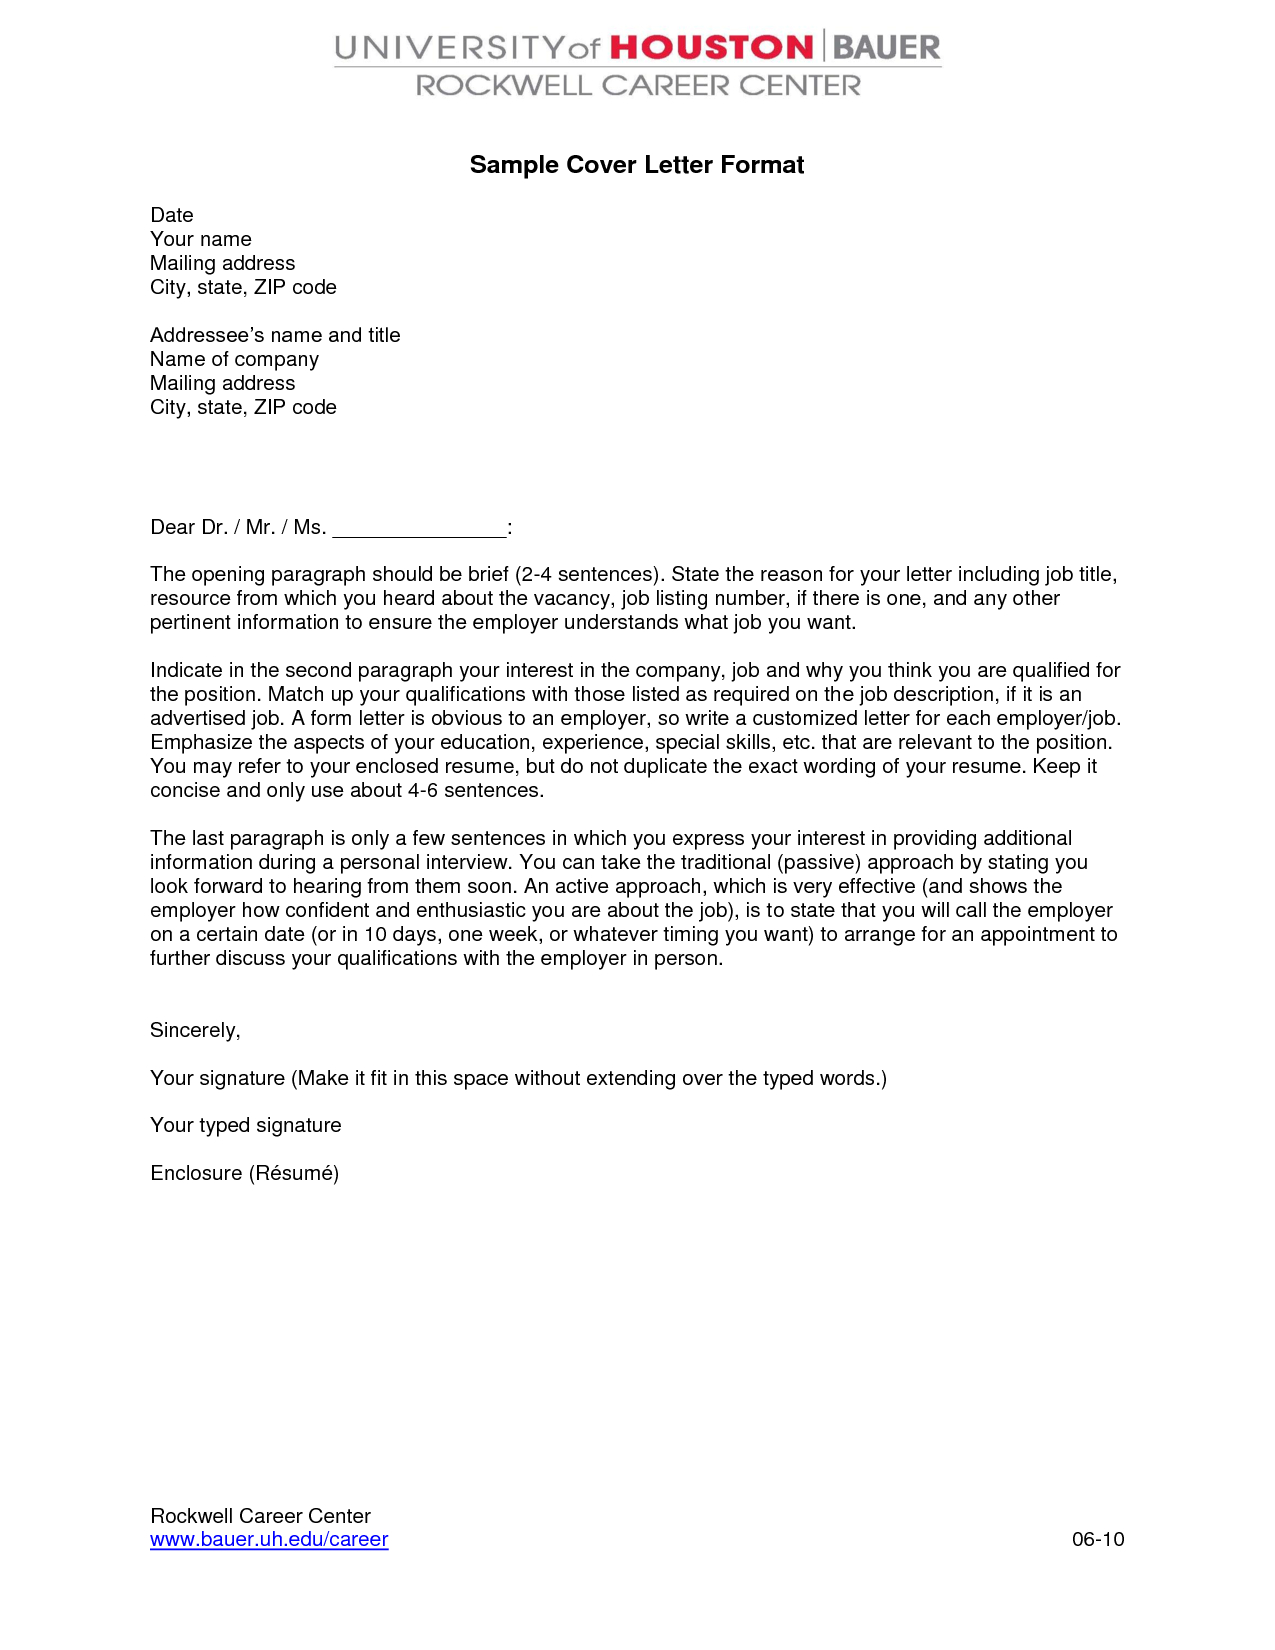 Letter format Template - Cover Letter Example format Acurnamedia